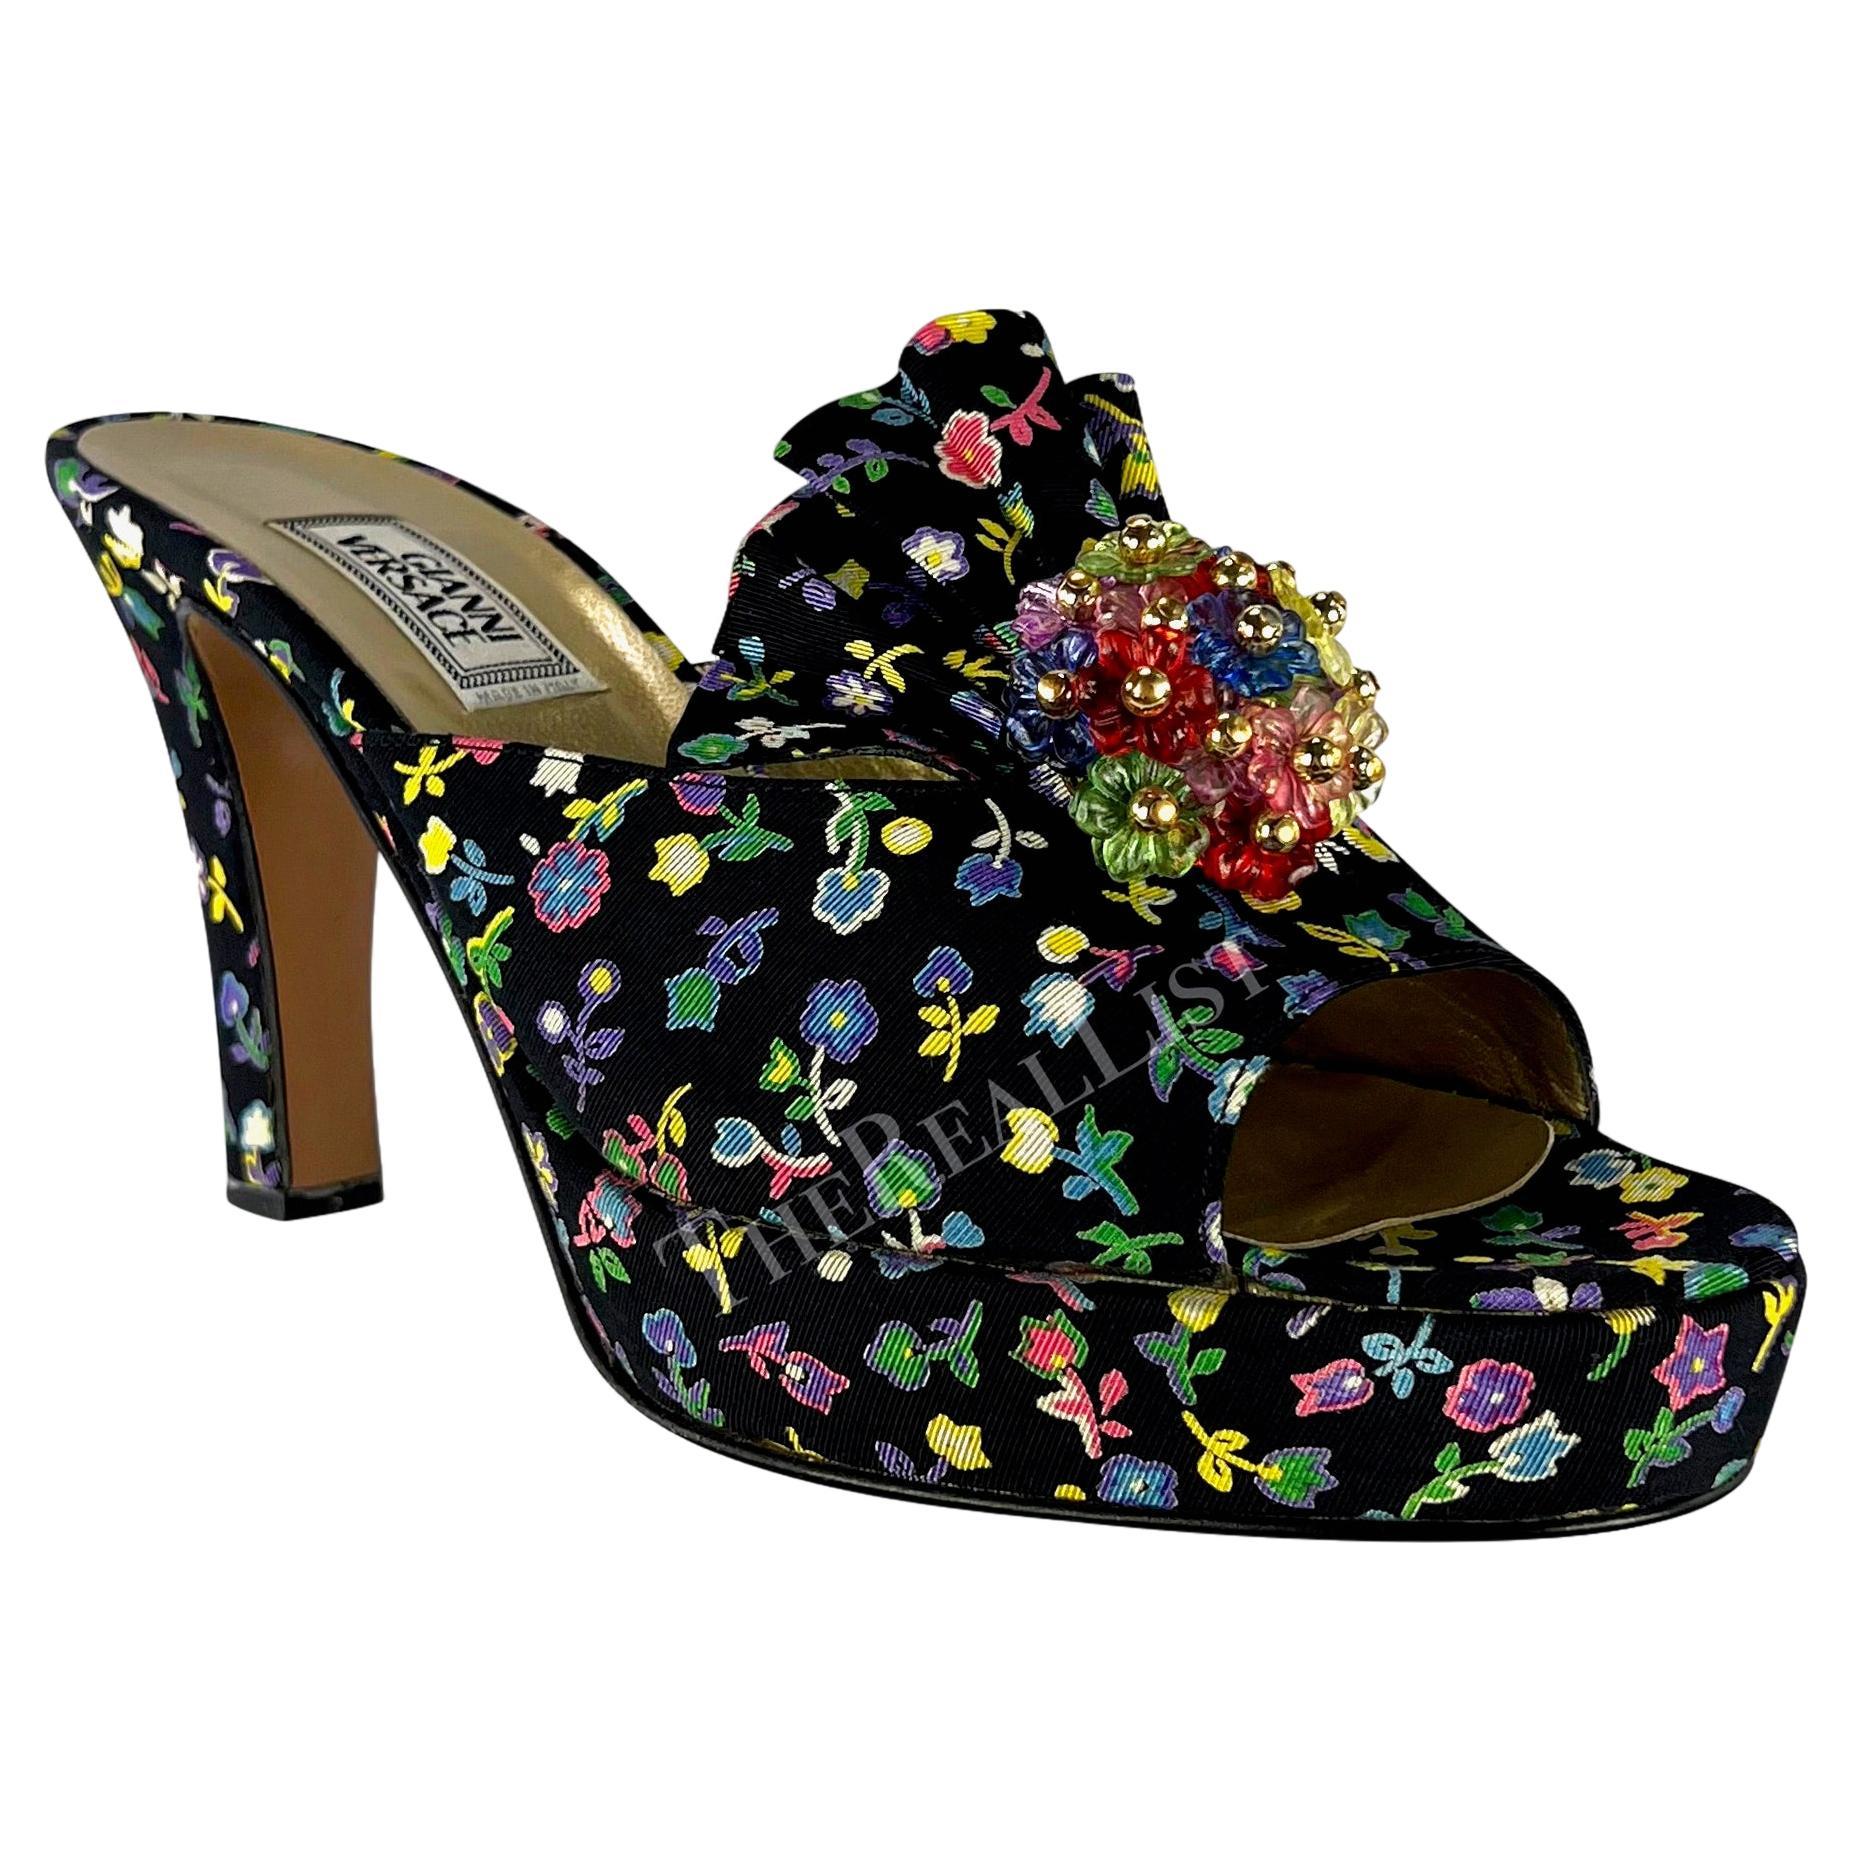 NEW S/S 1993 Gianni Versace Runway Floral Platform Beaded Heels Size 38 1/2 In Excellent Condition For Sale In West Hollywood, CA